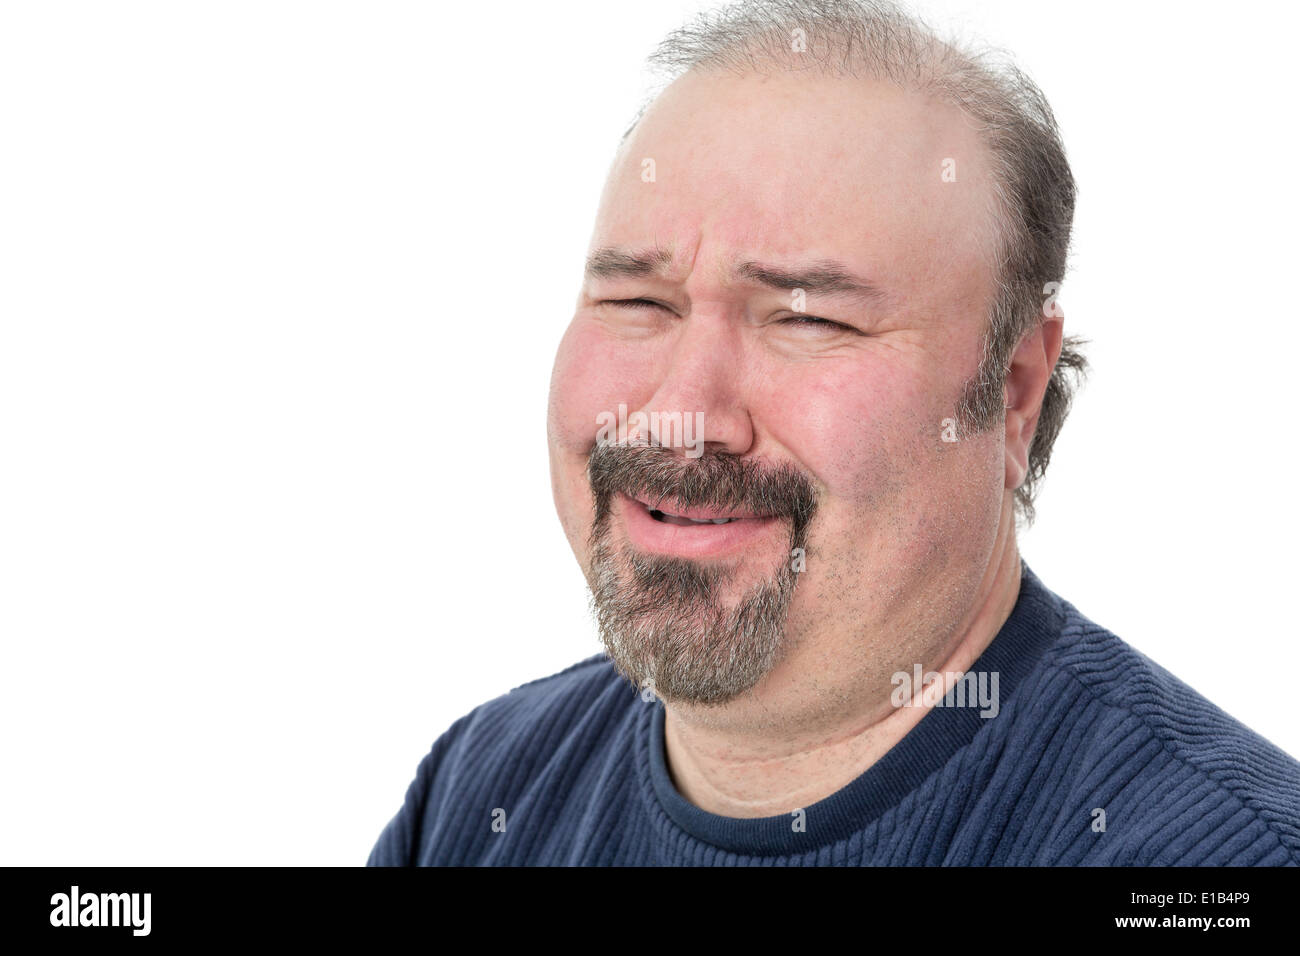 Close-up portrait of a man laughing with a disbelief expression Stock Photo